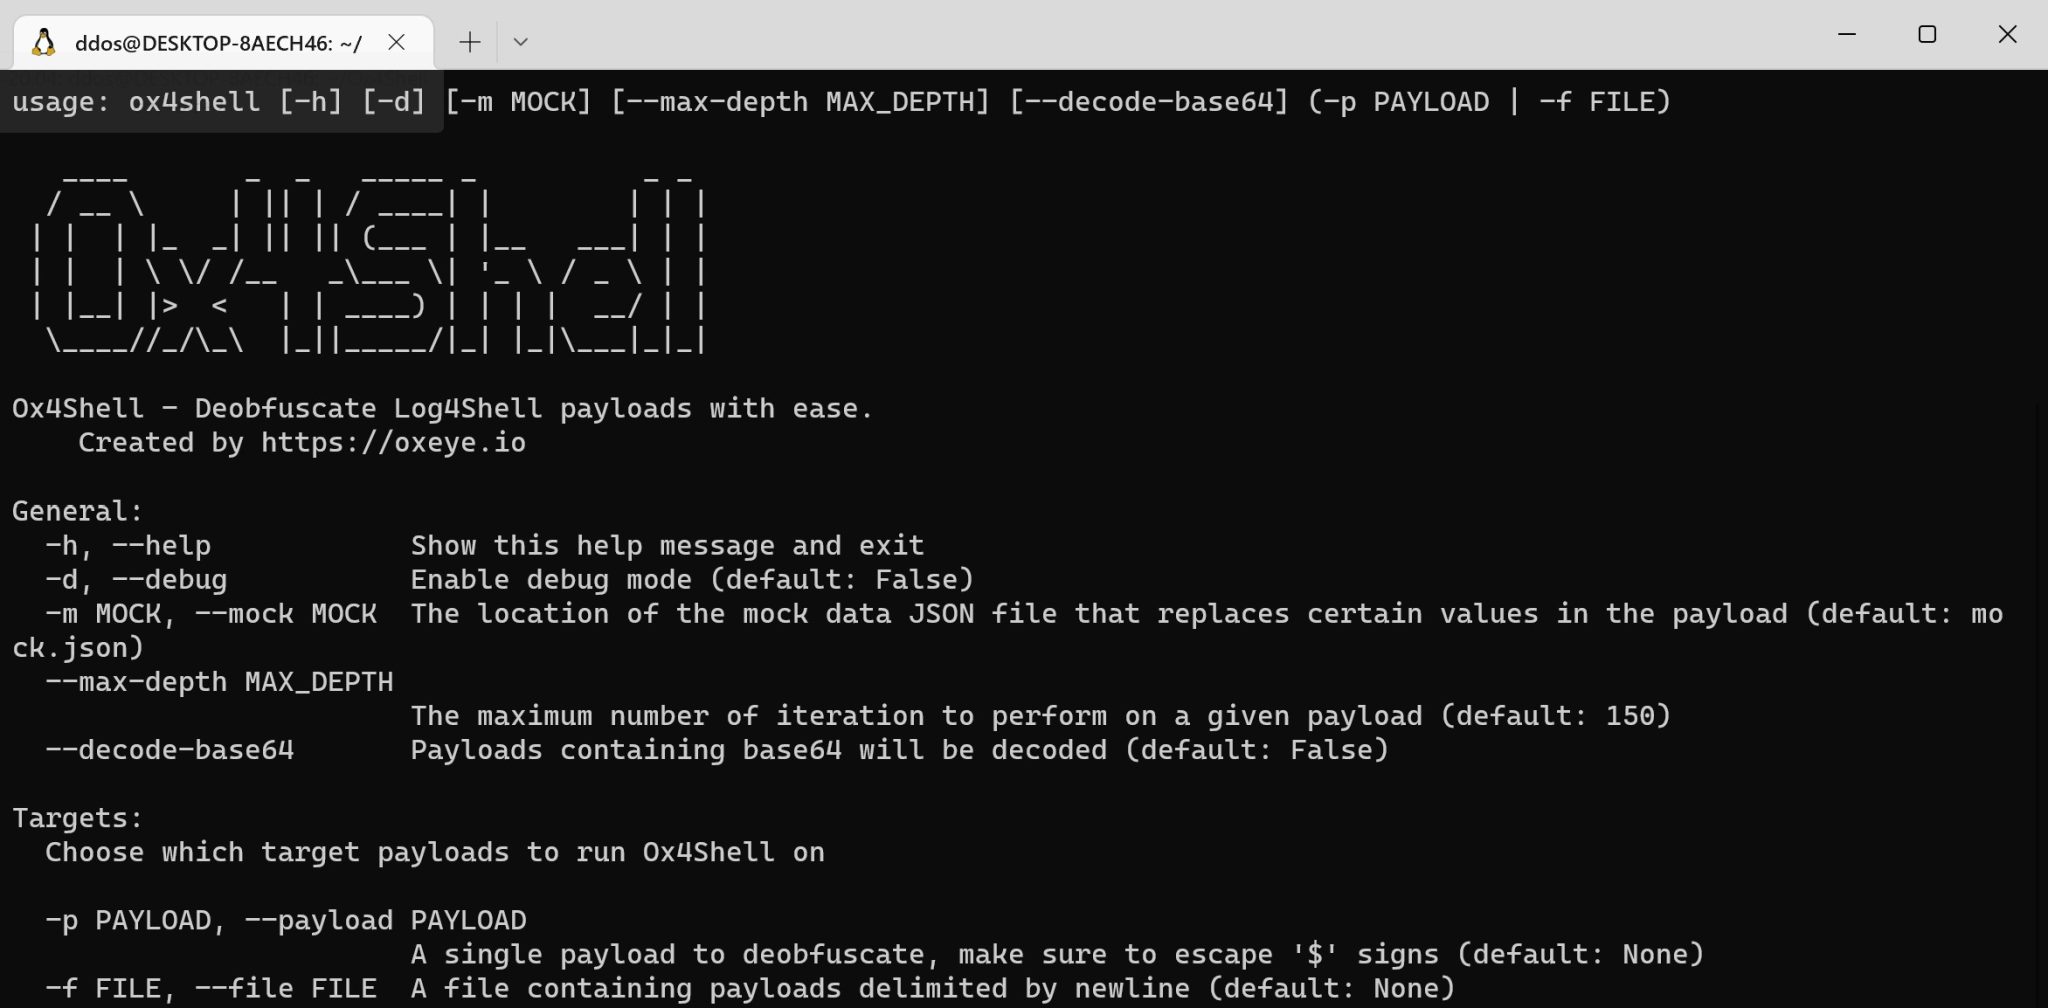 Deobfuscate Log4Shell payloads